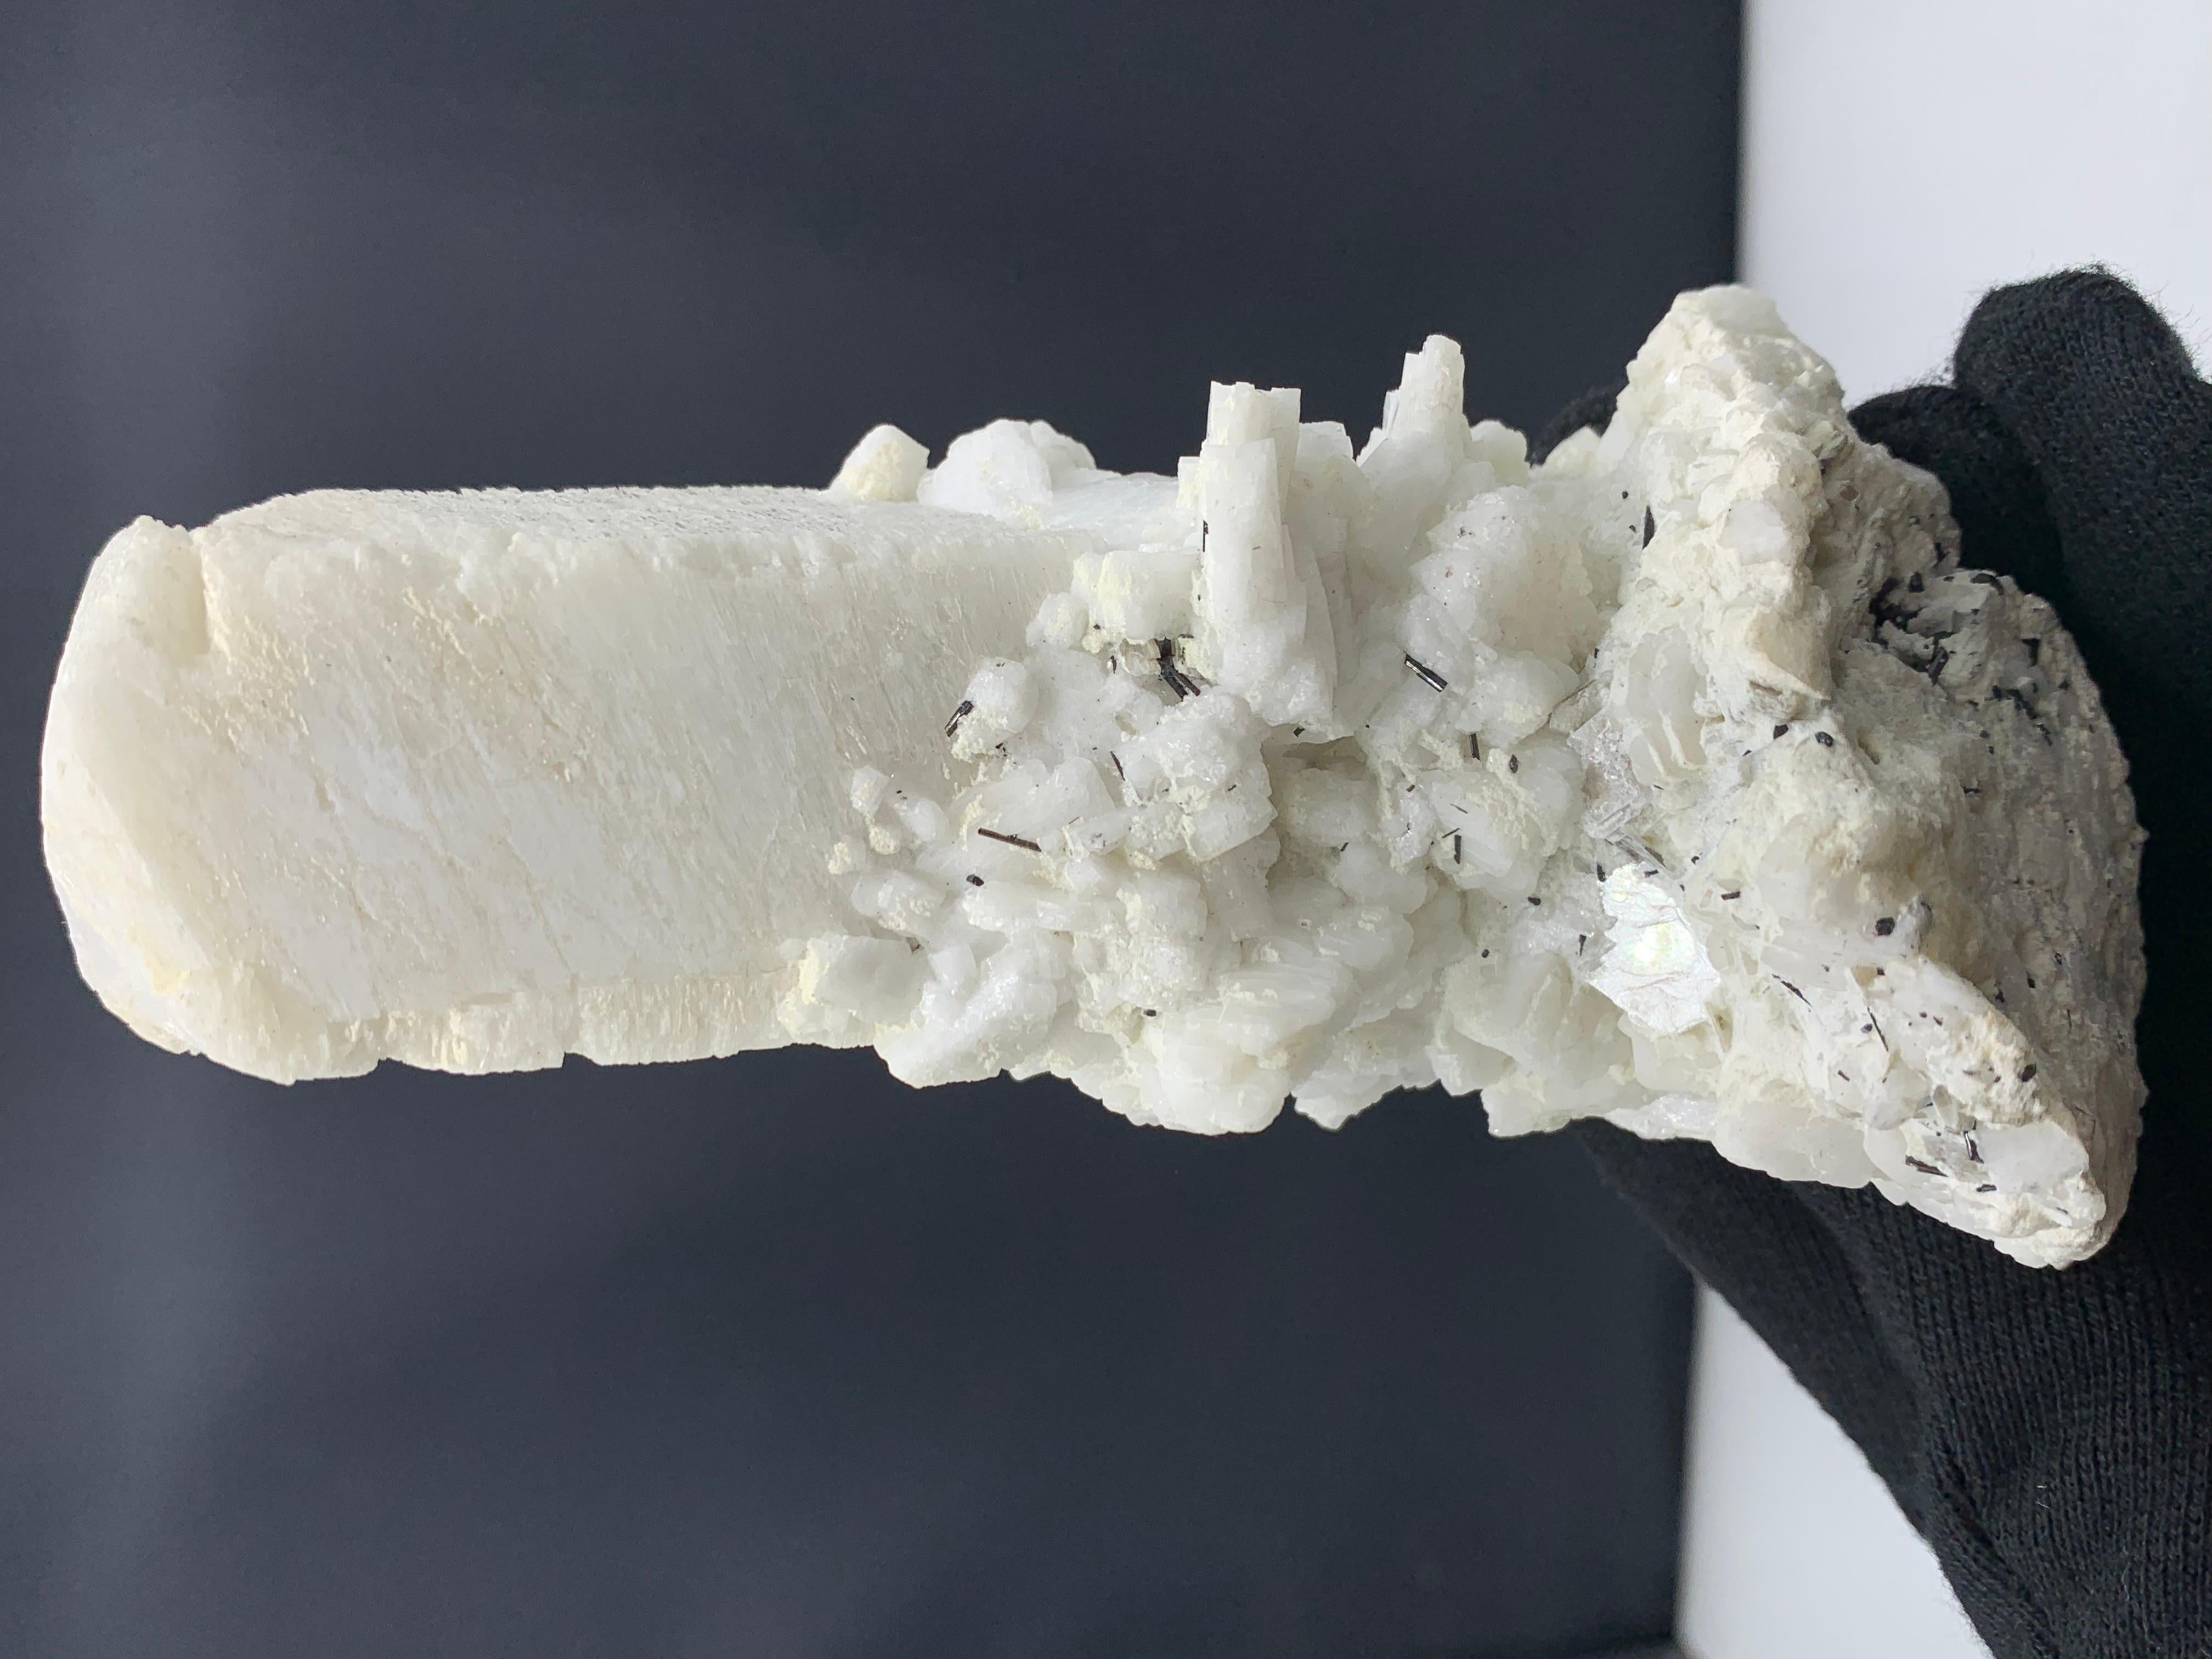 Weight: 359.98 Gram
Dimension: 13.6 x 7.1 x 7.3 Cm
Origin: Skardu Valley, Pakistan

Feldspar is the name given to a group of minerals distinguished by the presence of alumina and silica (SiO2) in their chemistry. This group includes aluminum